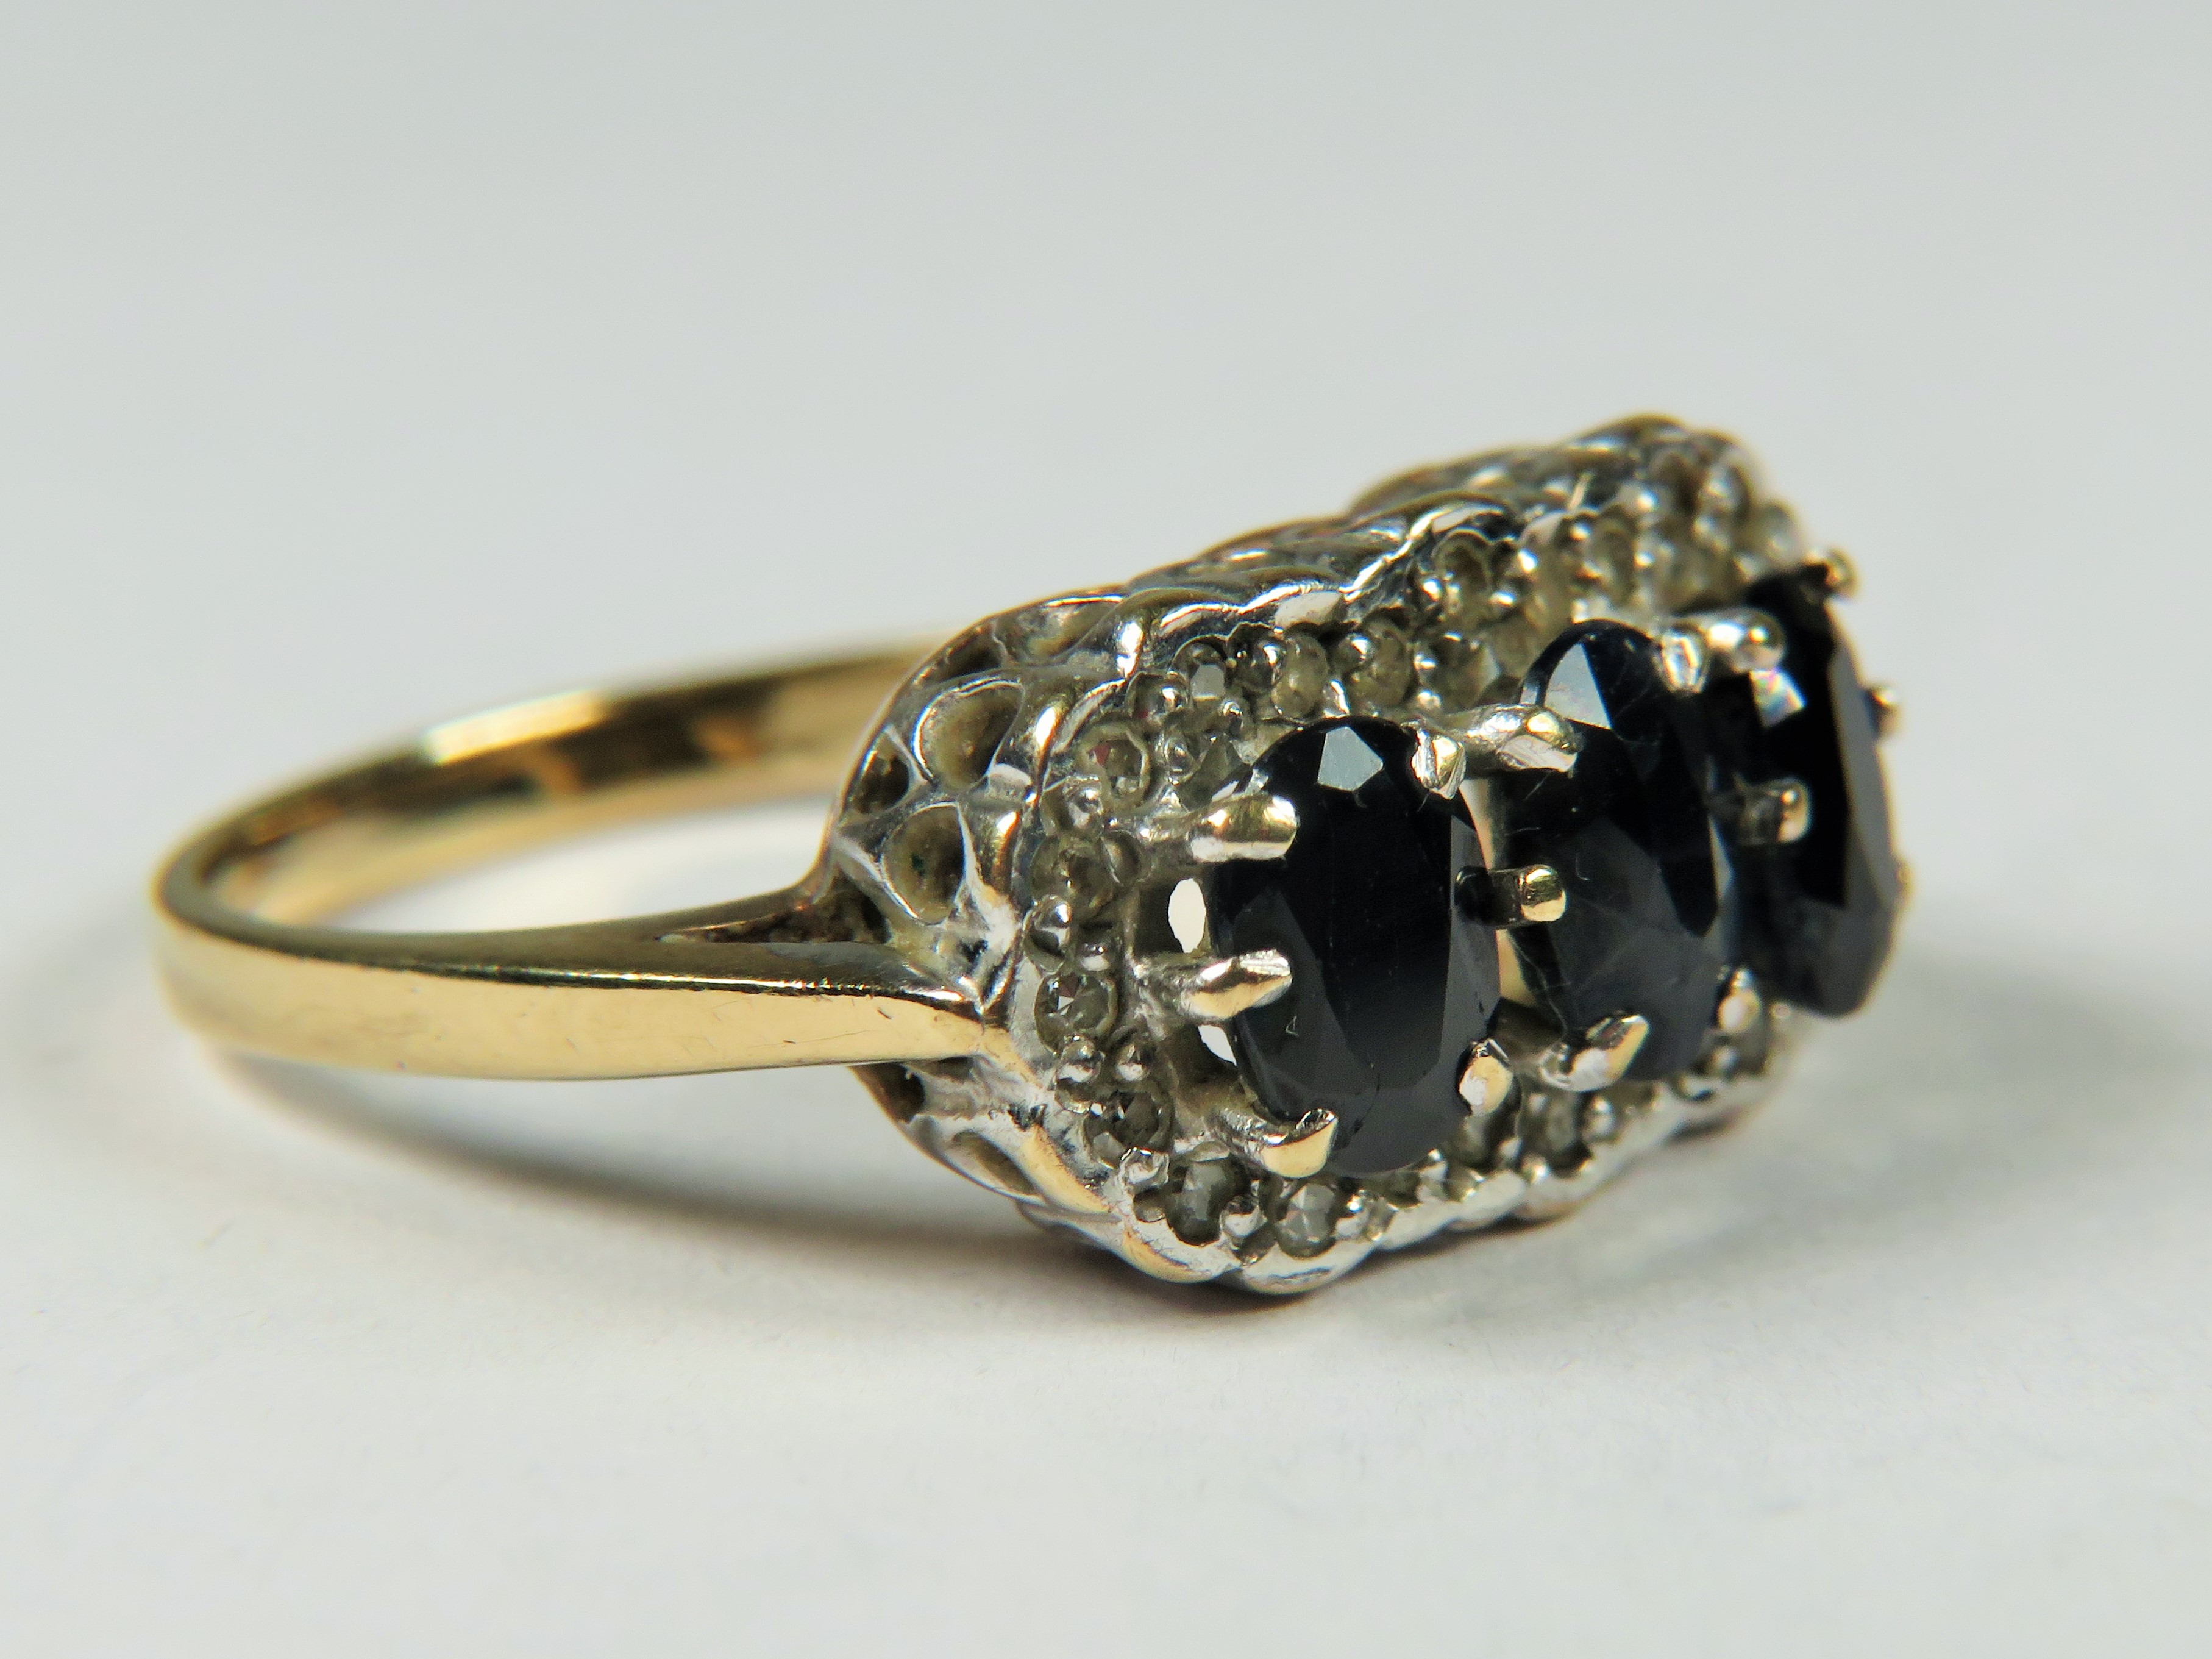 9ct Gold ring set with Triple Sapphires with Diamond surround.   Finger size 'L-5'  3.2g - Image 4 of 5